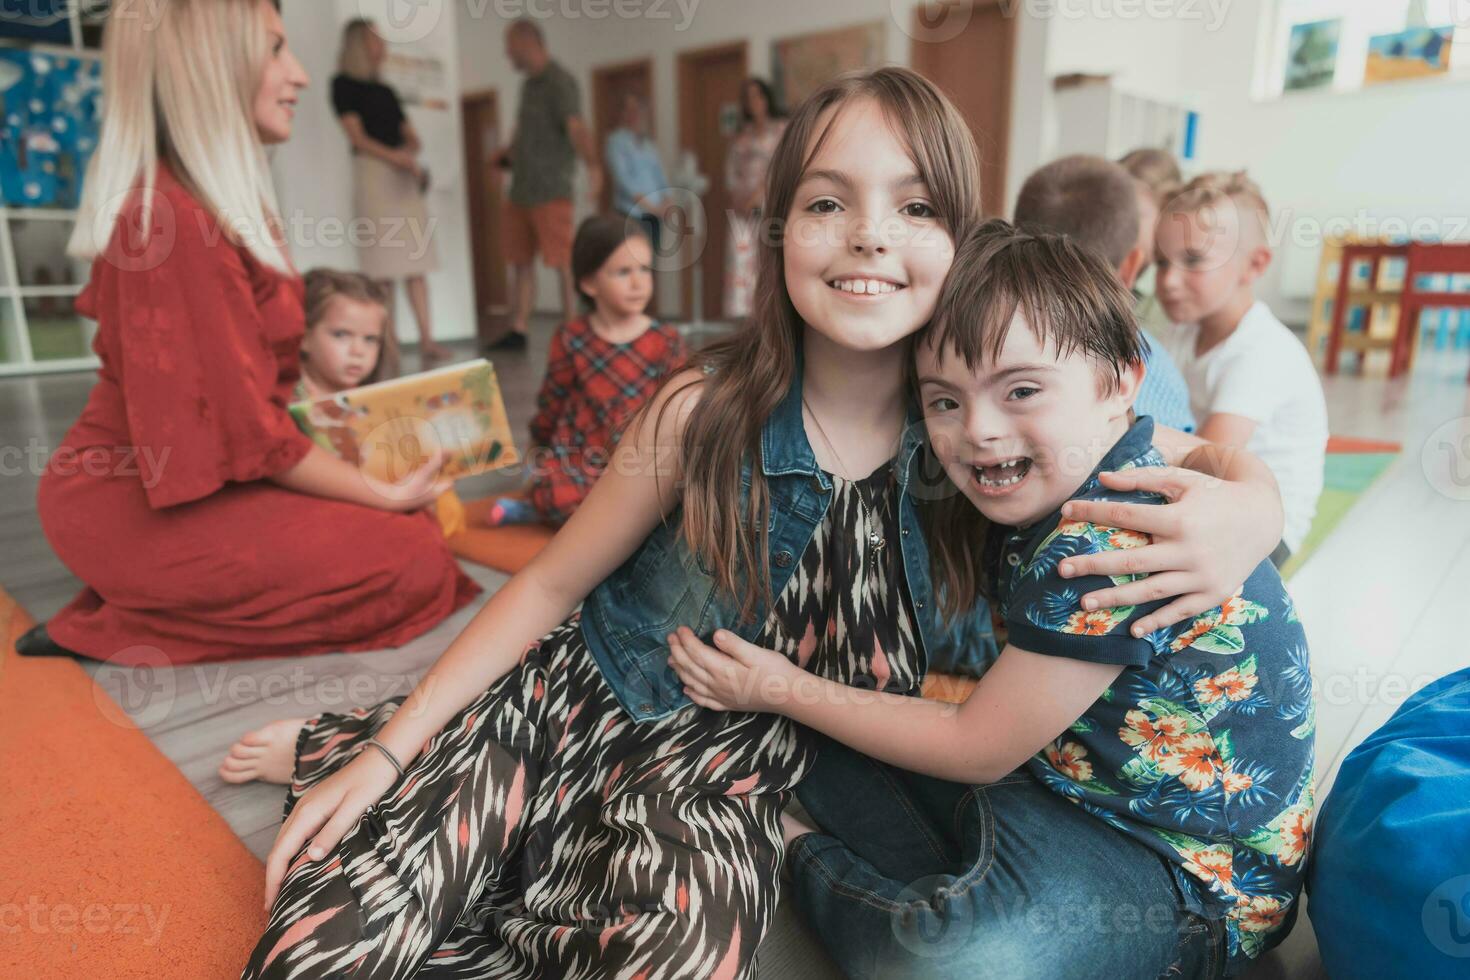 A girl and a boy with Down's syndrome in each other's arms spend time together in a preschool institution photo